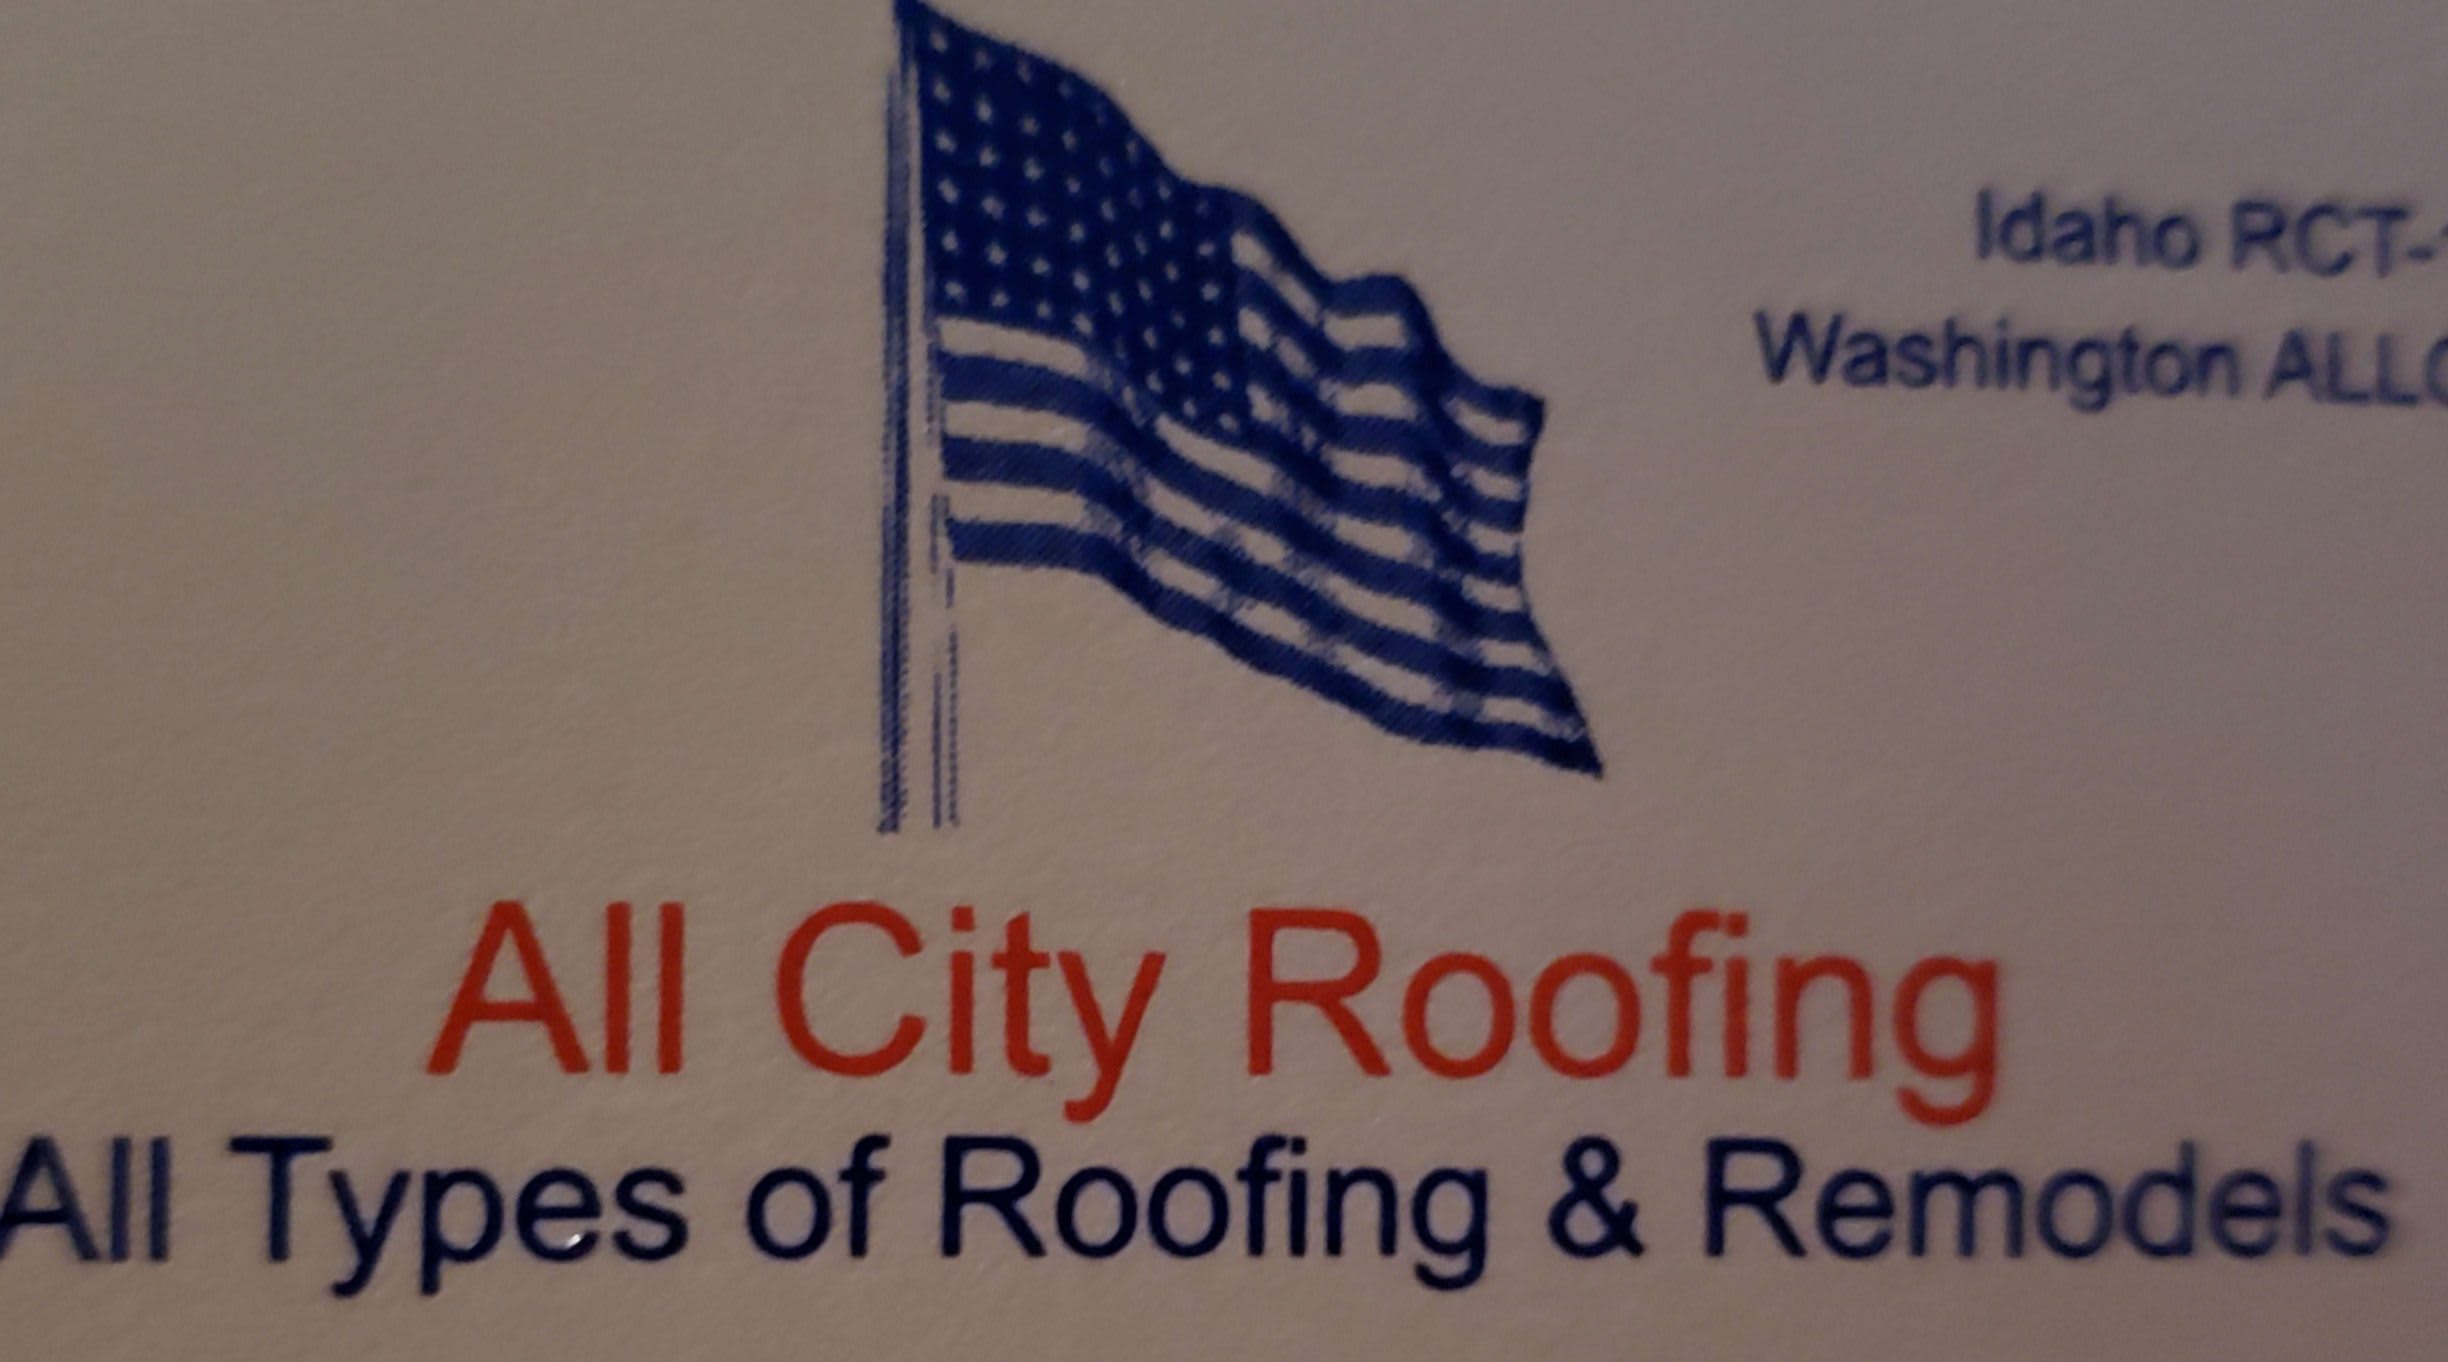 All City Roofing & Construction